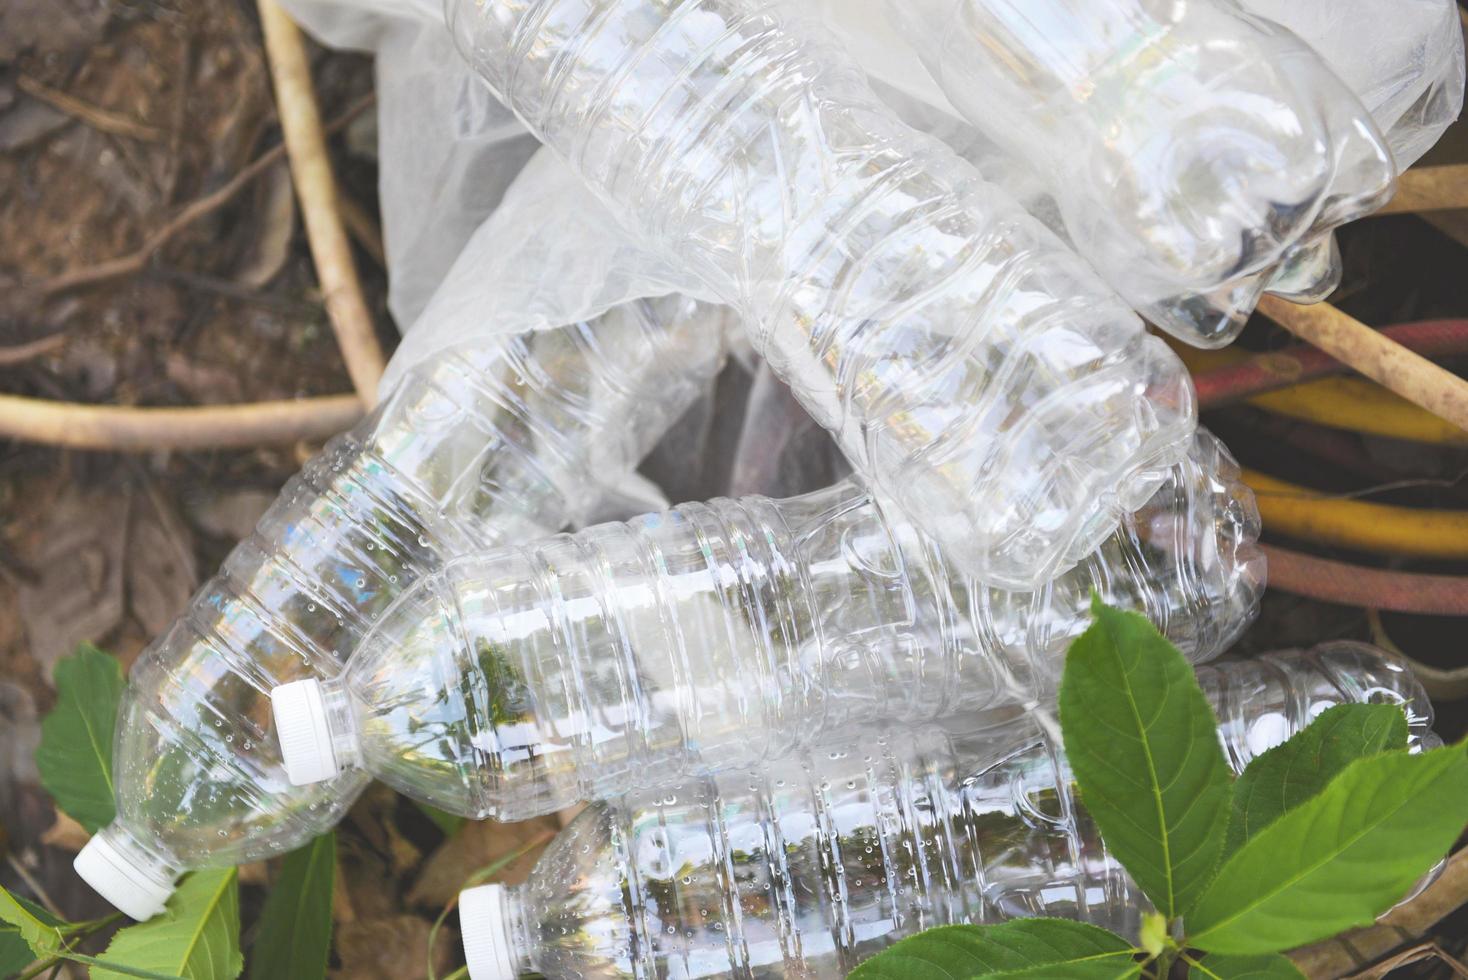 plastic bottle pollution environment Recycle waste management photo